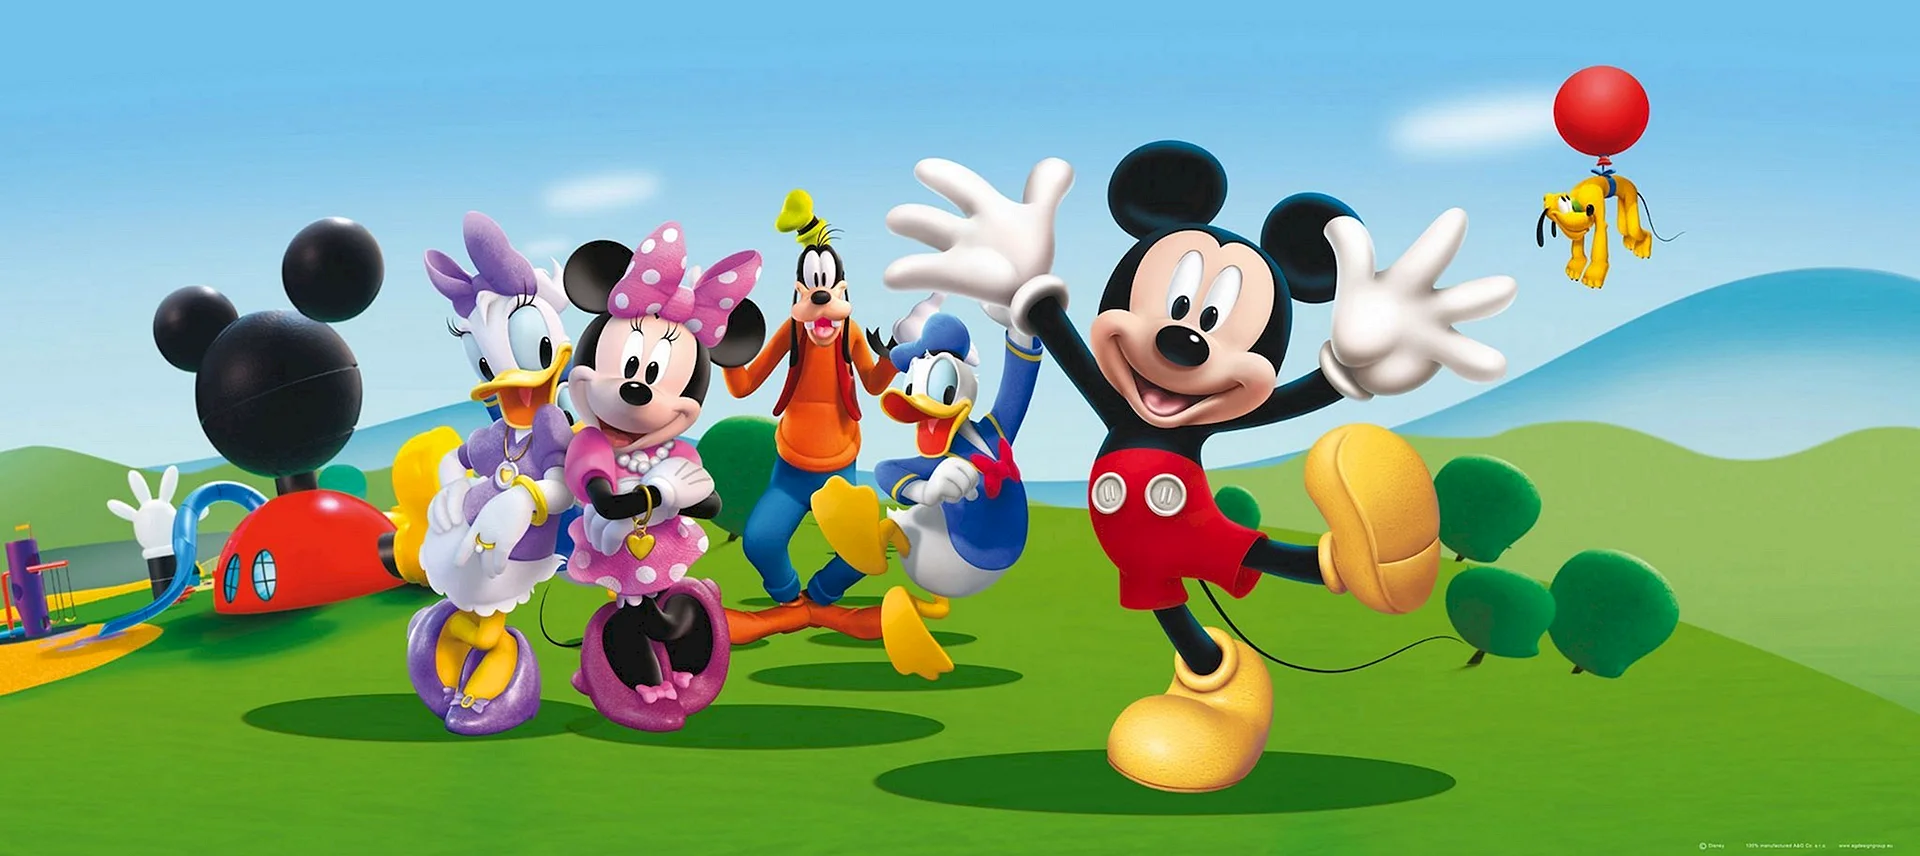 Mickey Mouse Clubhouse Wallpaper – Wallpapers High Resolution